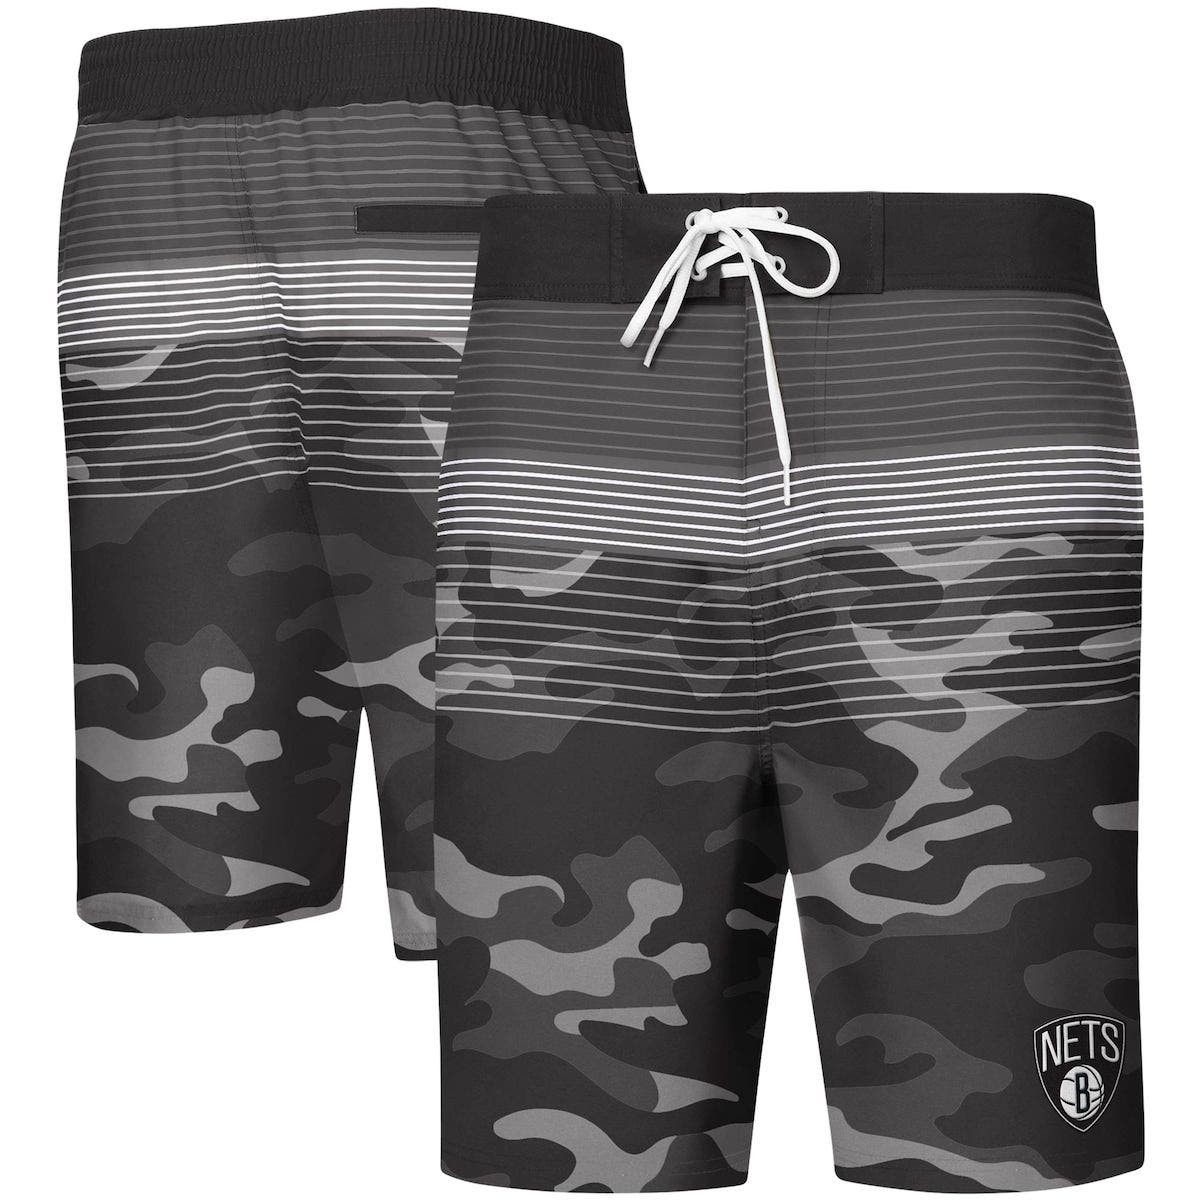 Camouflage in Wintry Blues Mens Beach Shorts Lightweight Running Trunks with 3 Pockets 